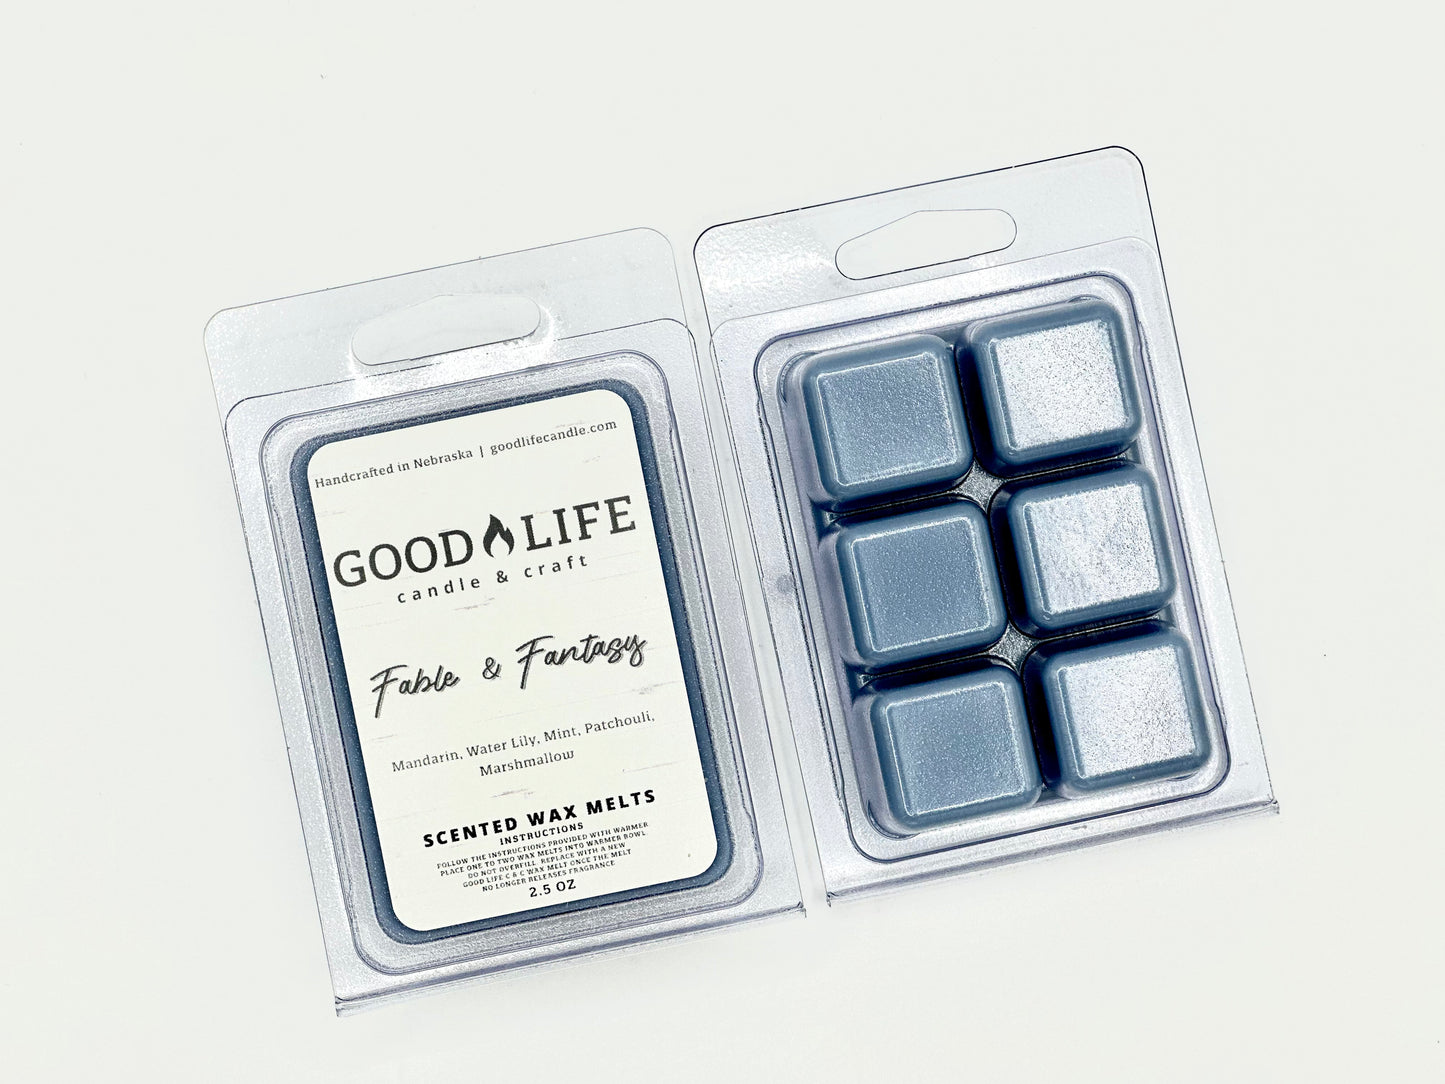 Fable and Fantasy 2.5 oz Wax Melts